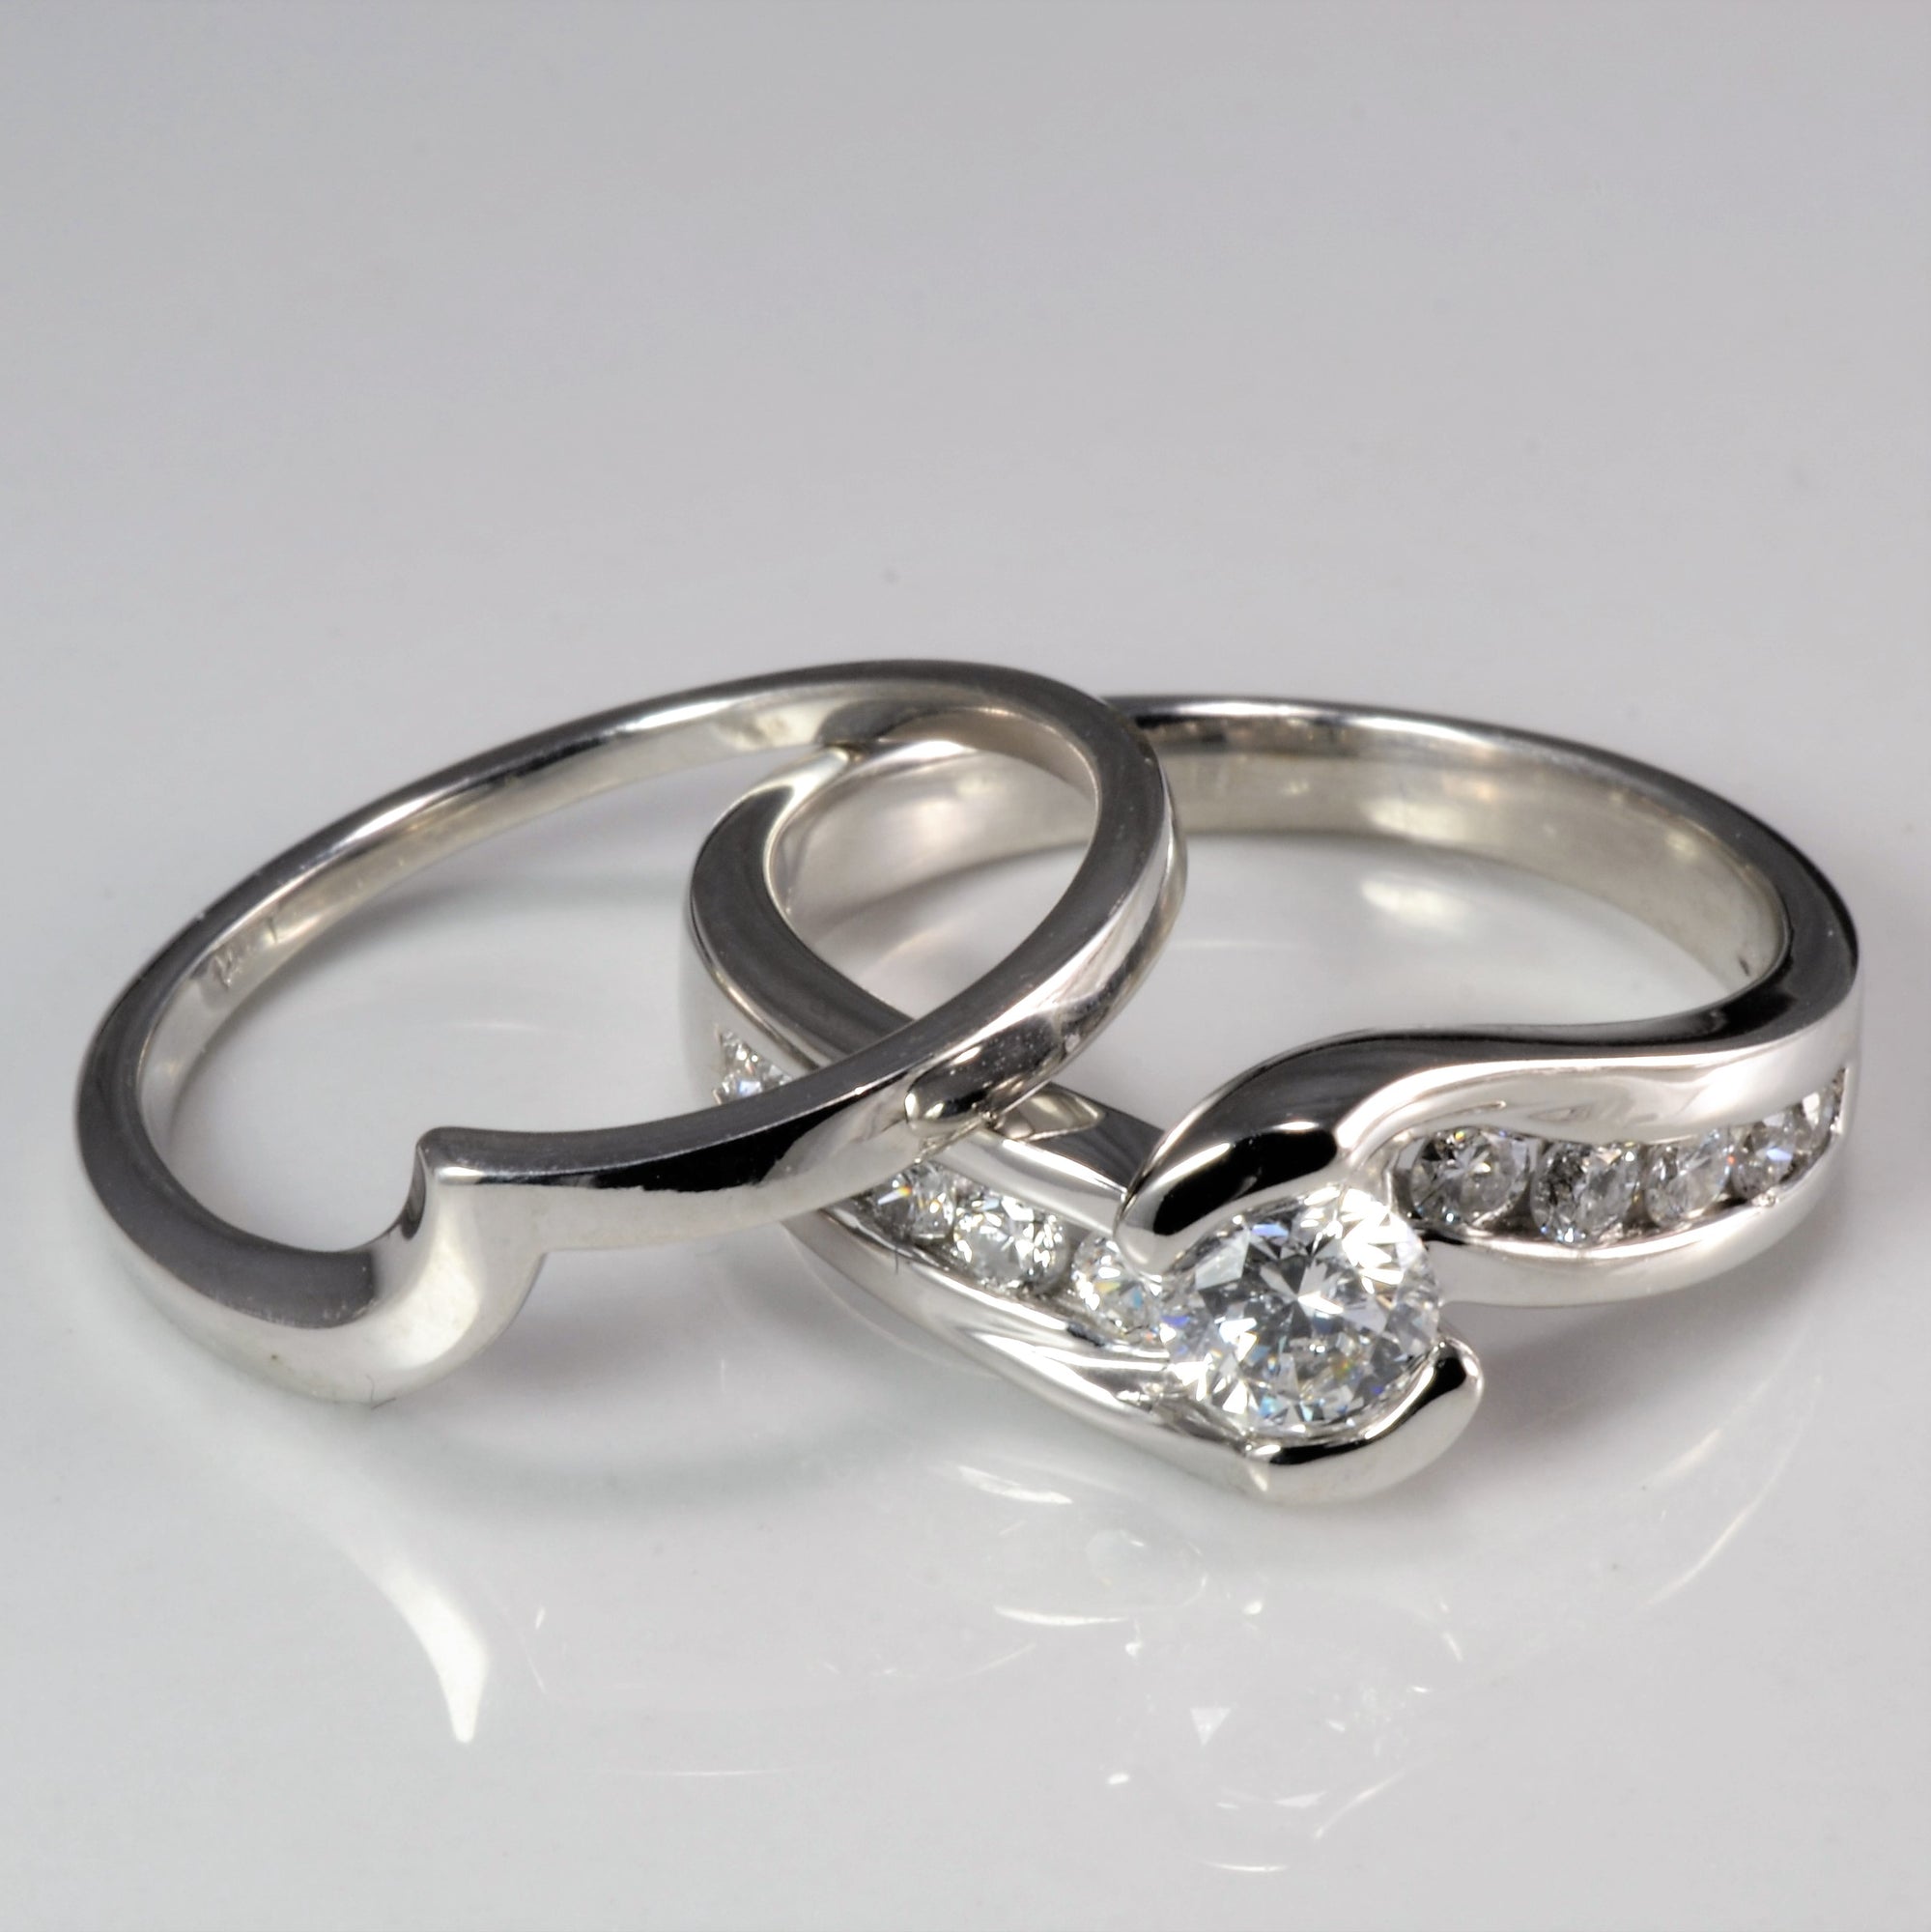 Bypass Channel Diamond Engagement Ring | 0.50 ctw, SZ 5.5 |